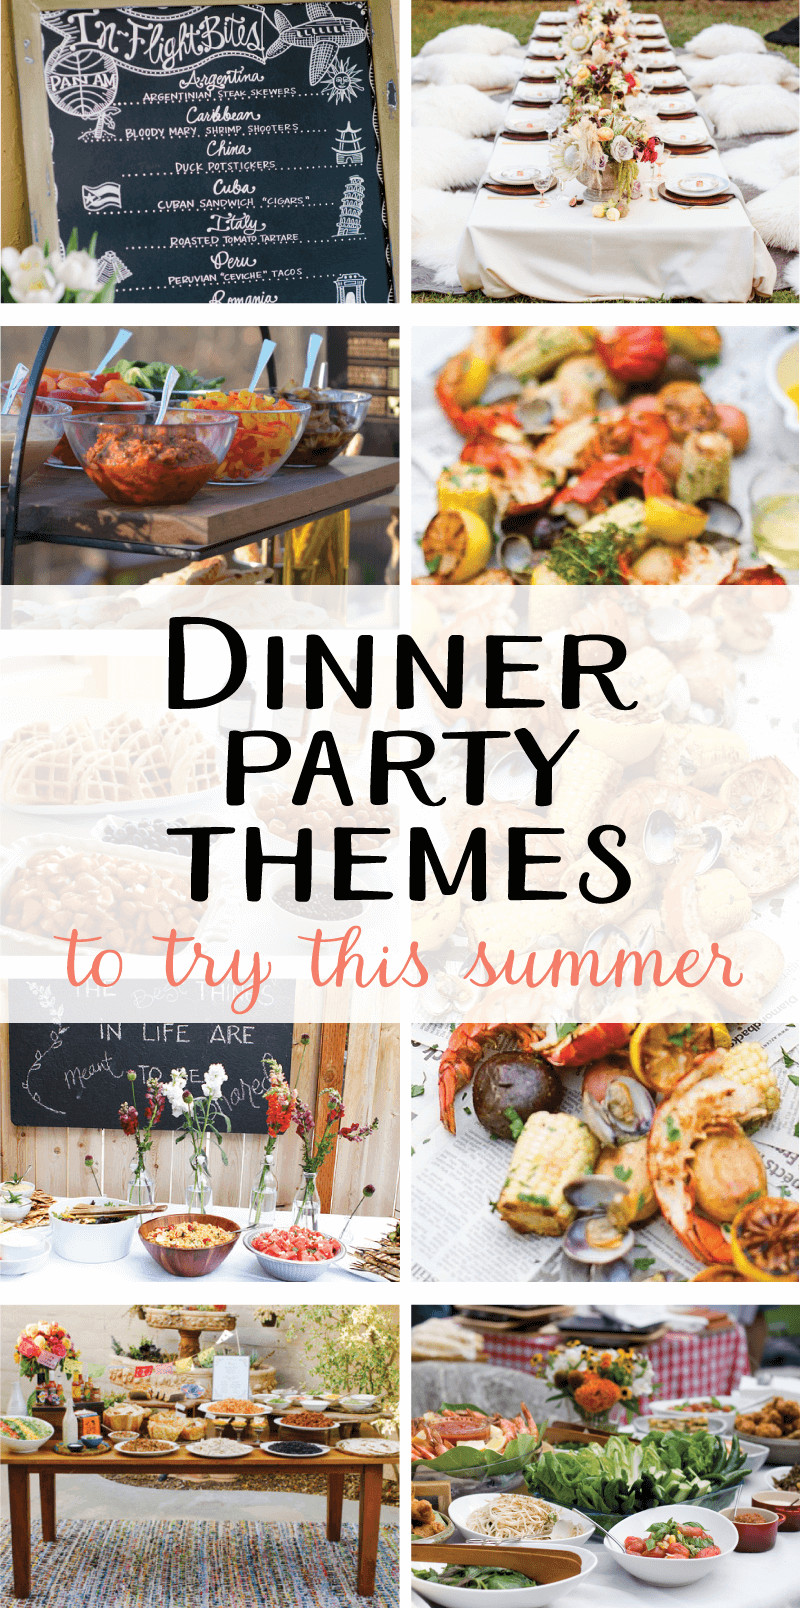 Dinner Ideas For Dinner Party
 9 Creative Dinner Party Themes to Try this Summer on Love